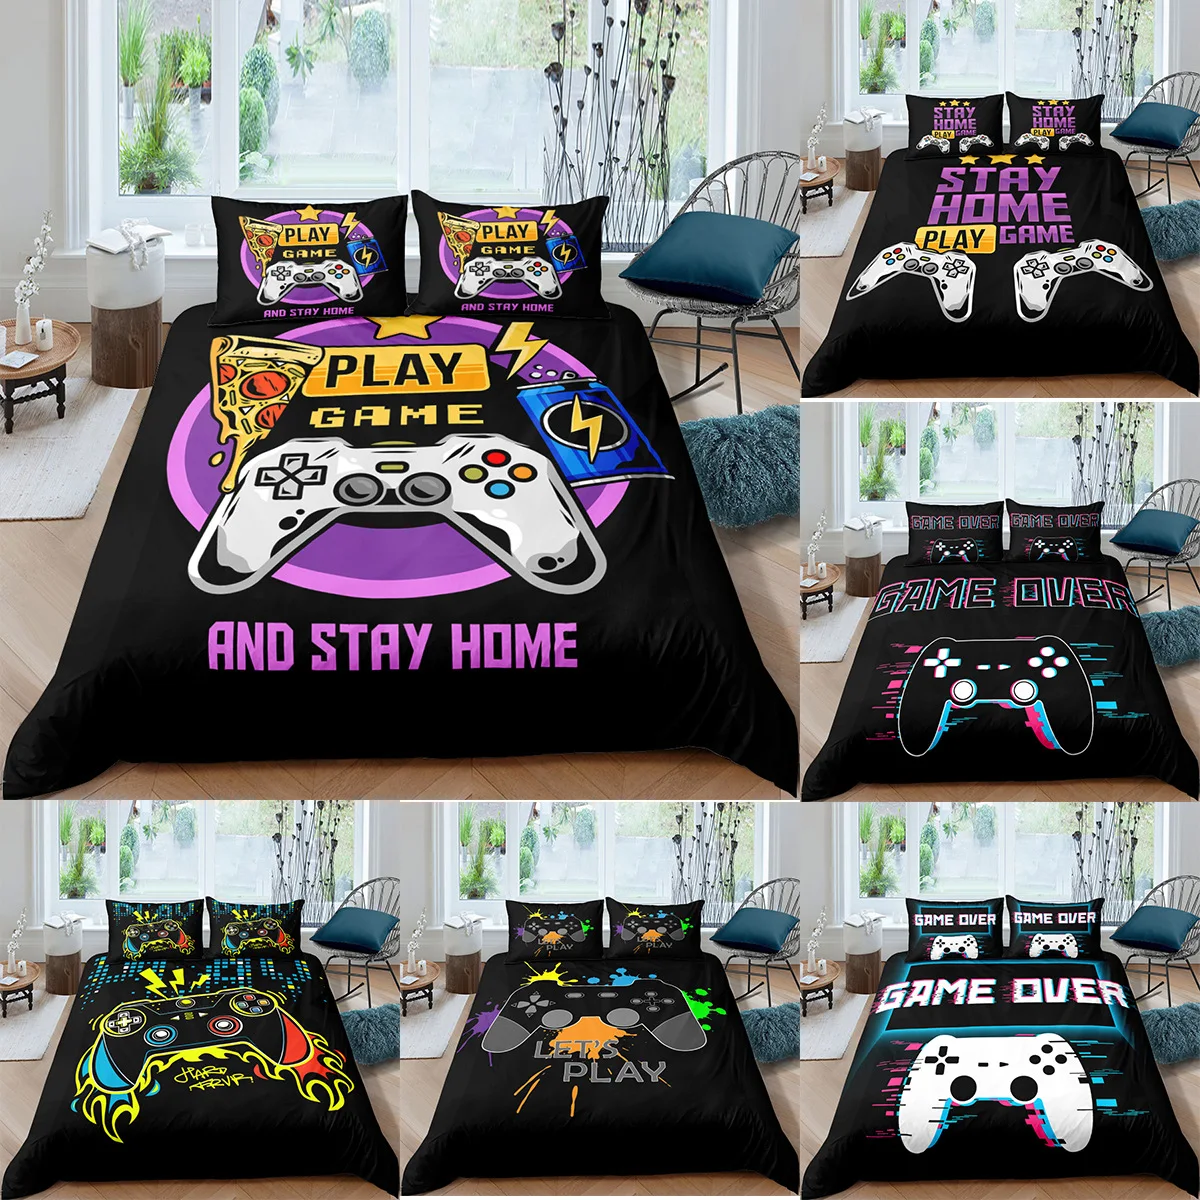 

Gamepad Bedding Set For Boy Teen Soft Comforter Duvet Cover Set Bedspreads Twin Queen King Sizes Quilt Cover With Pillowcase